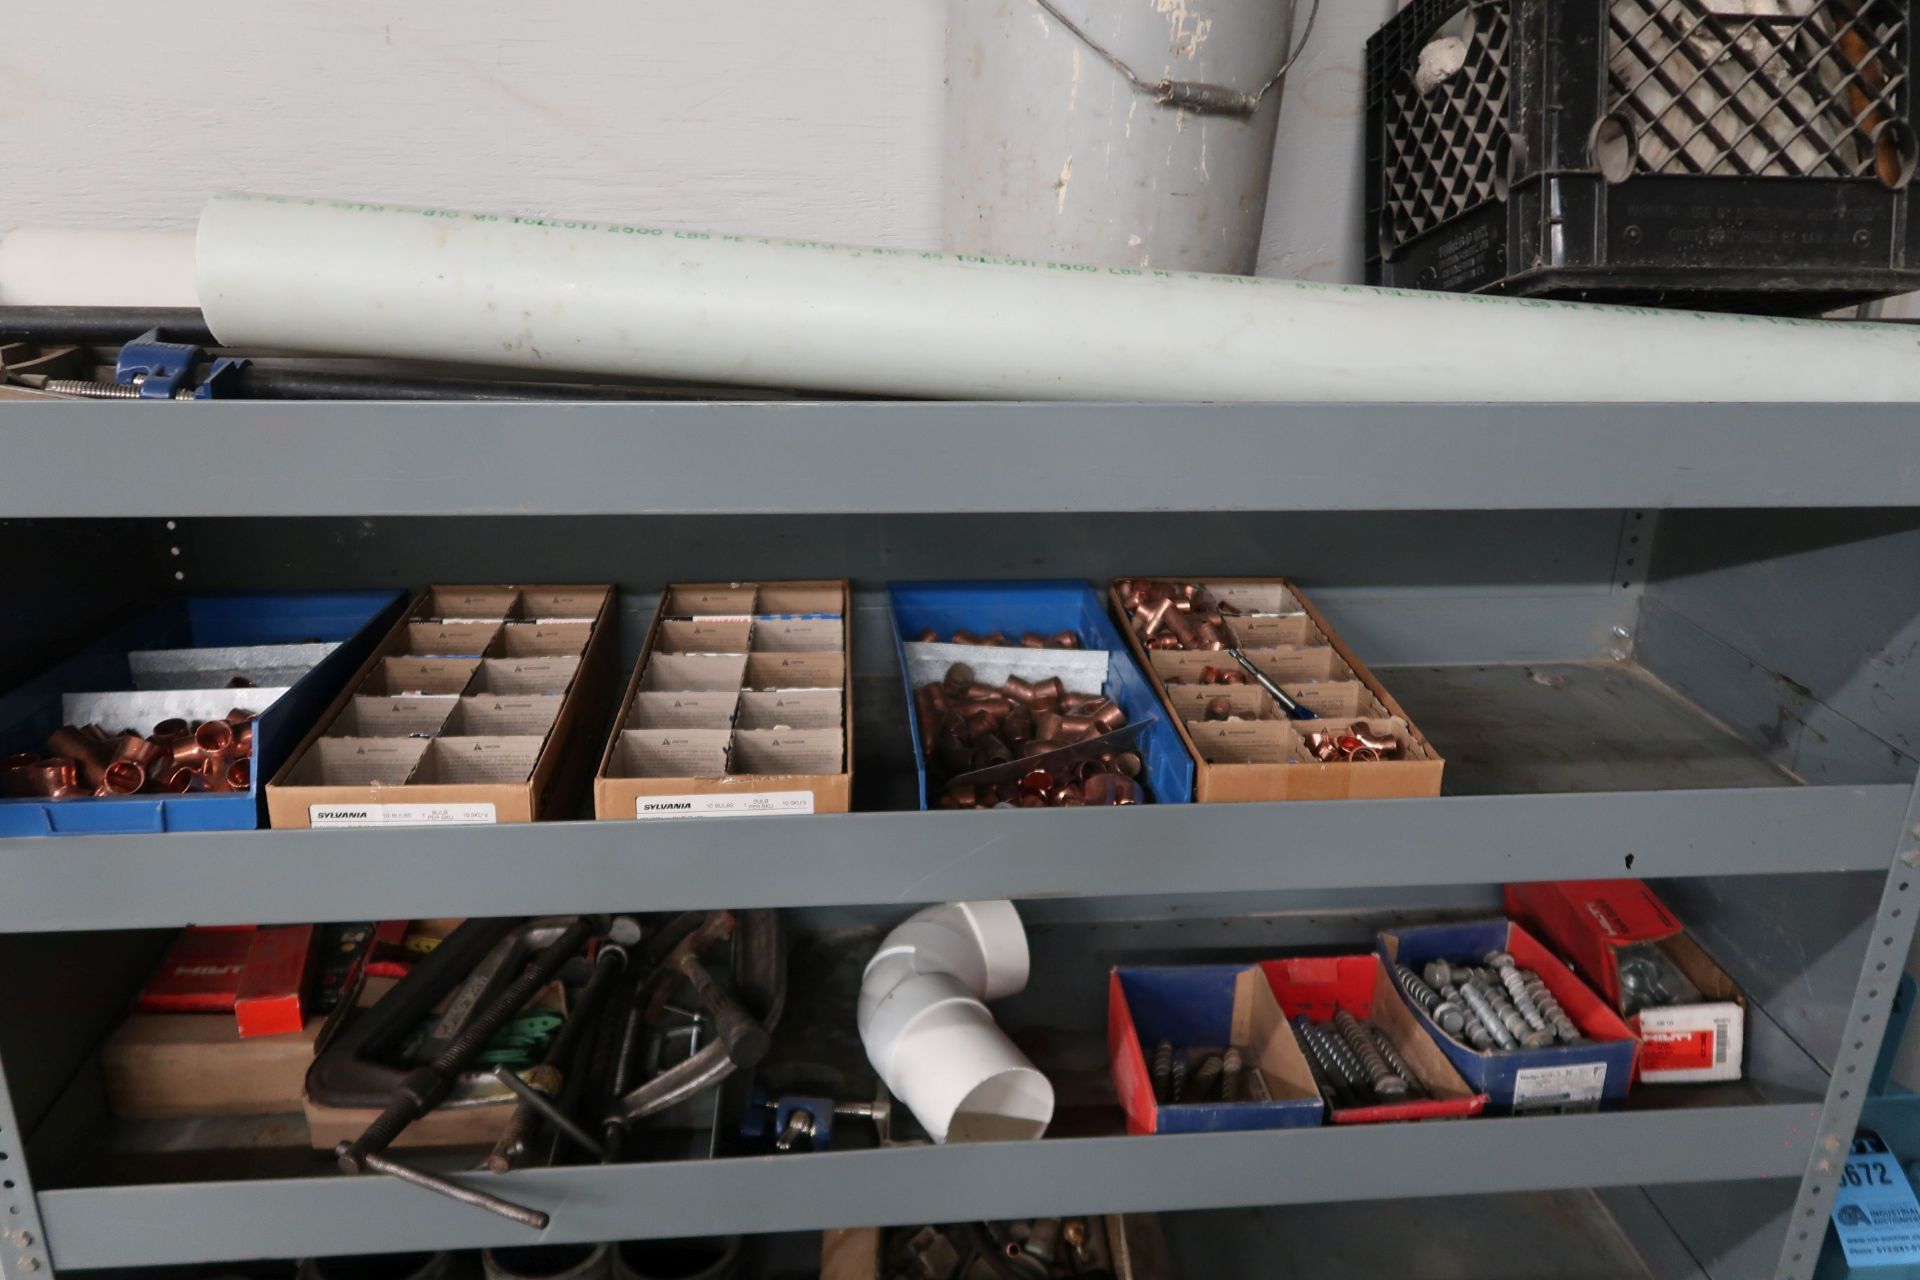 CONTENTS OF SHELF INCLUDING FIRE EXTINGUISHERS, C-CLAMPS, PIPE FITTINGS, HARDWARE, POLE CLAMPS - Image 2 of 3